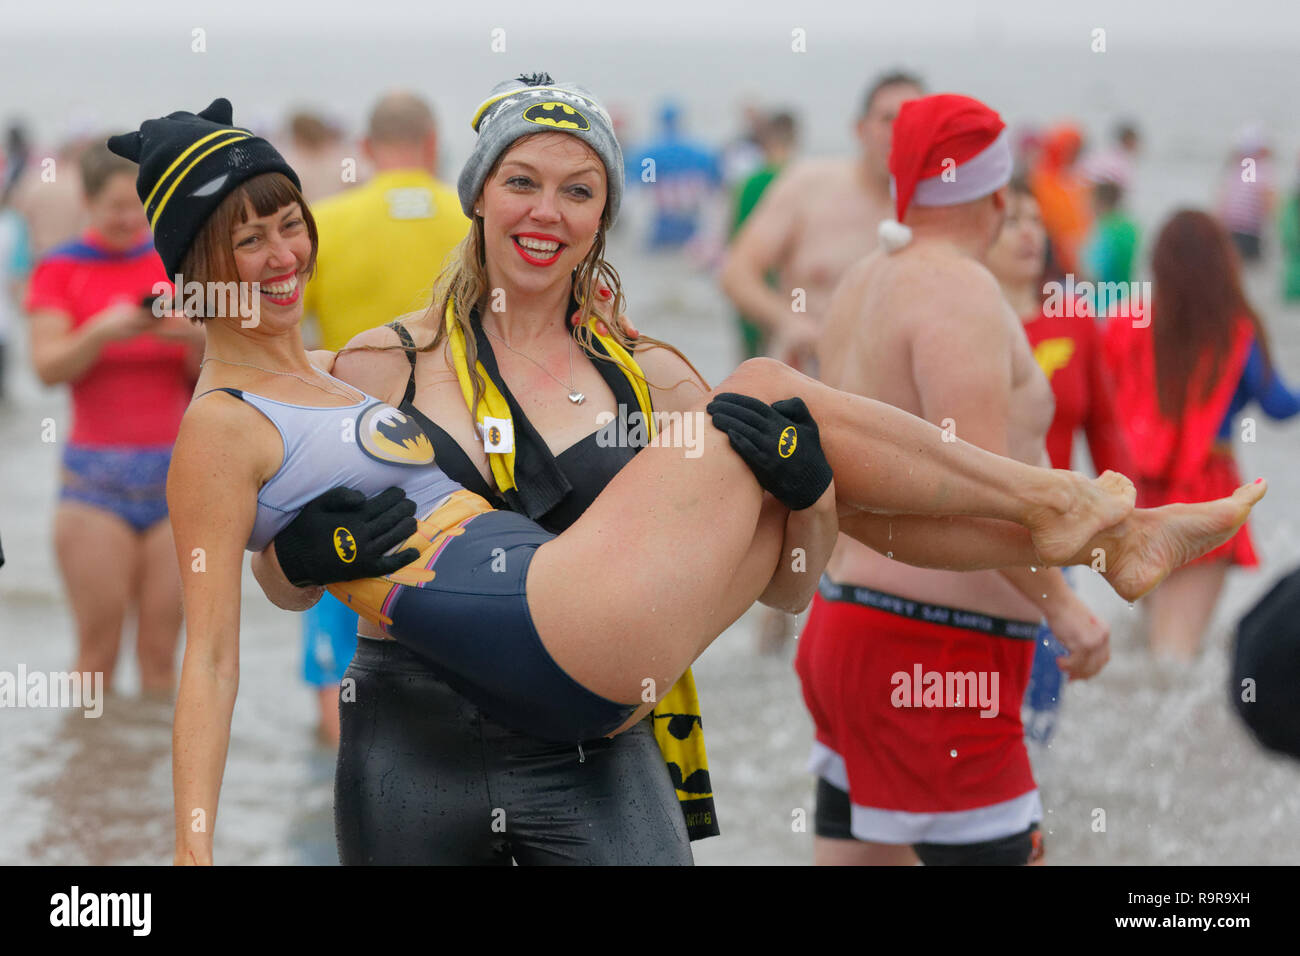 Pictured: Two women in Batman costumes. Tuesday 25 December 2018 Re: Hundreds of people take part in this year's Porthcawl Christmas Swim in south Wal Stock Photo